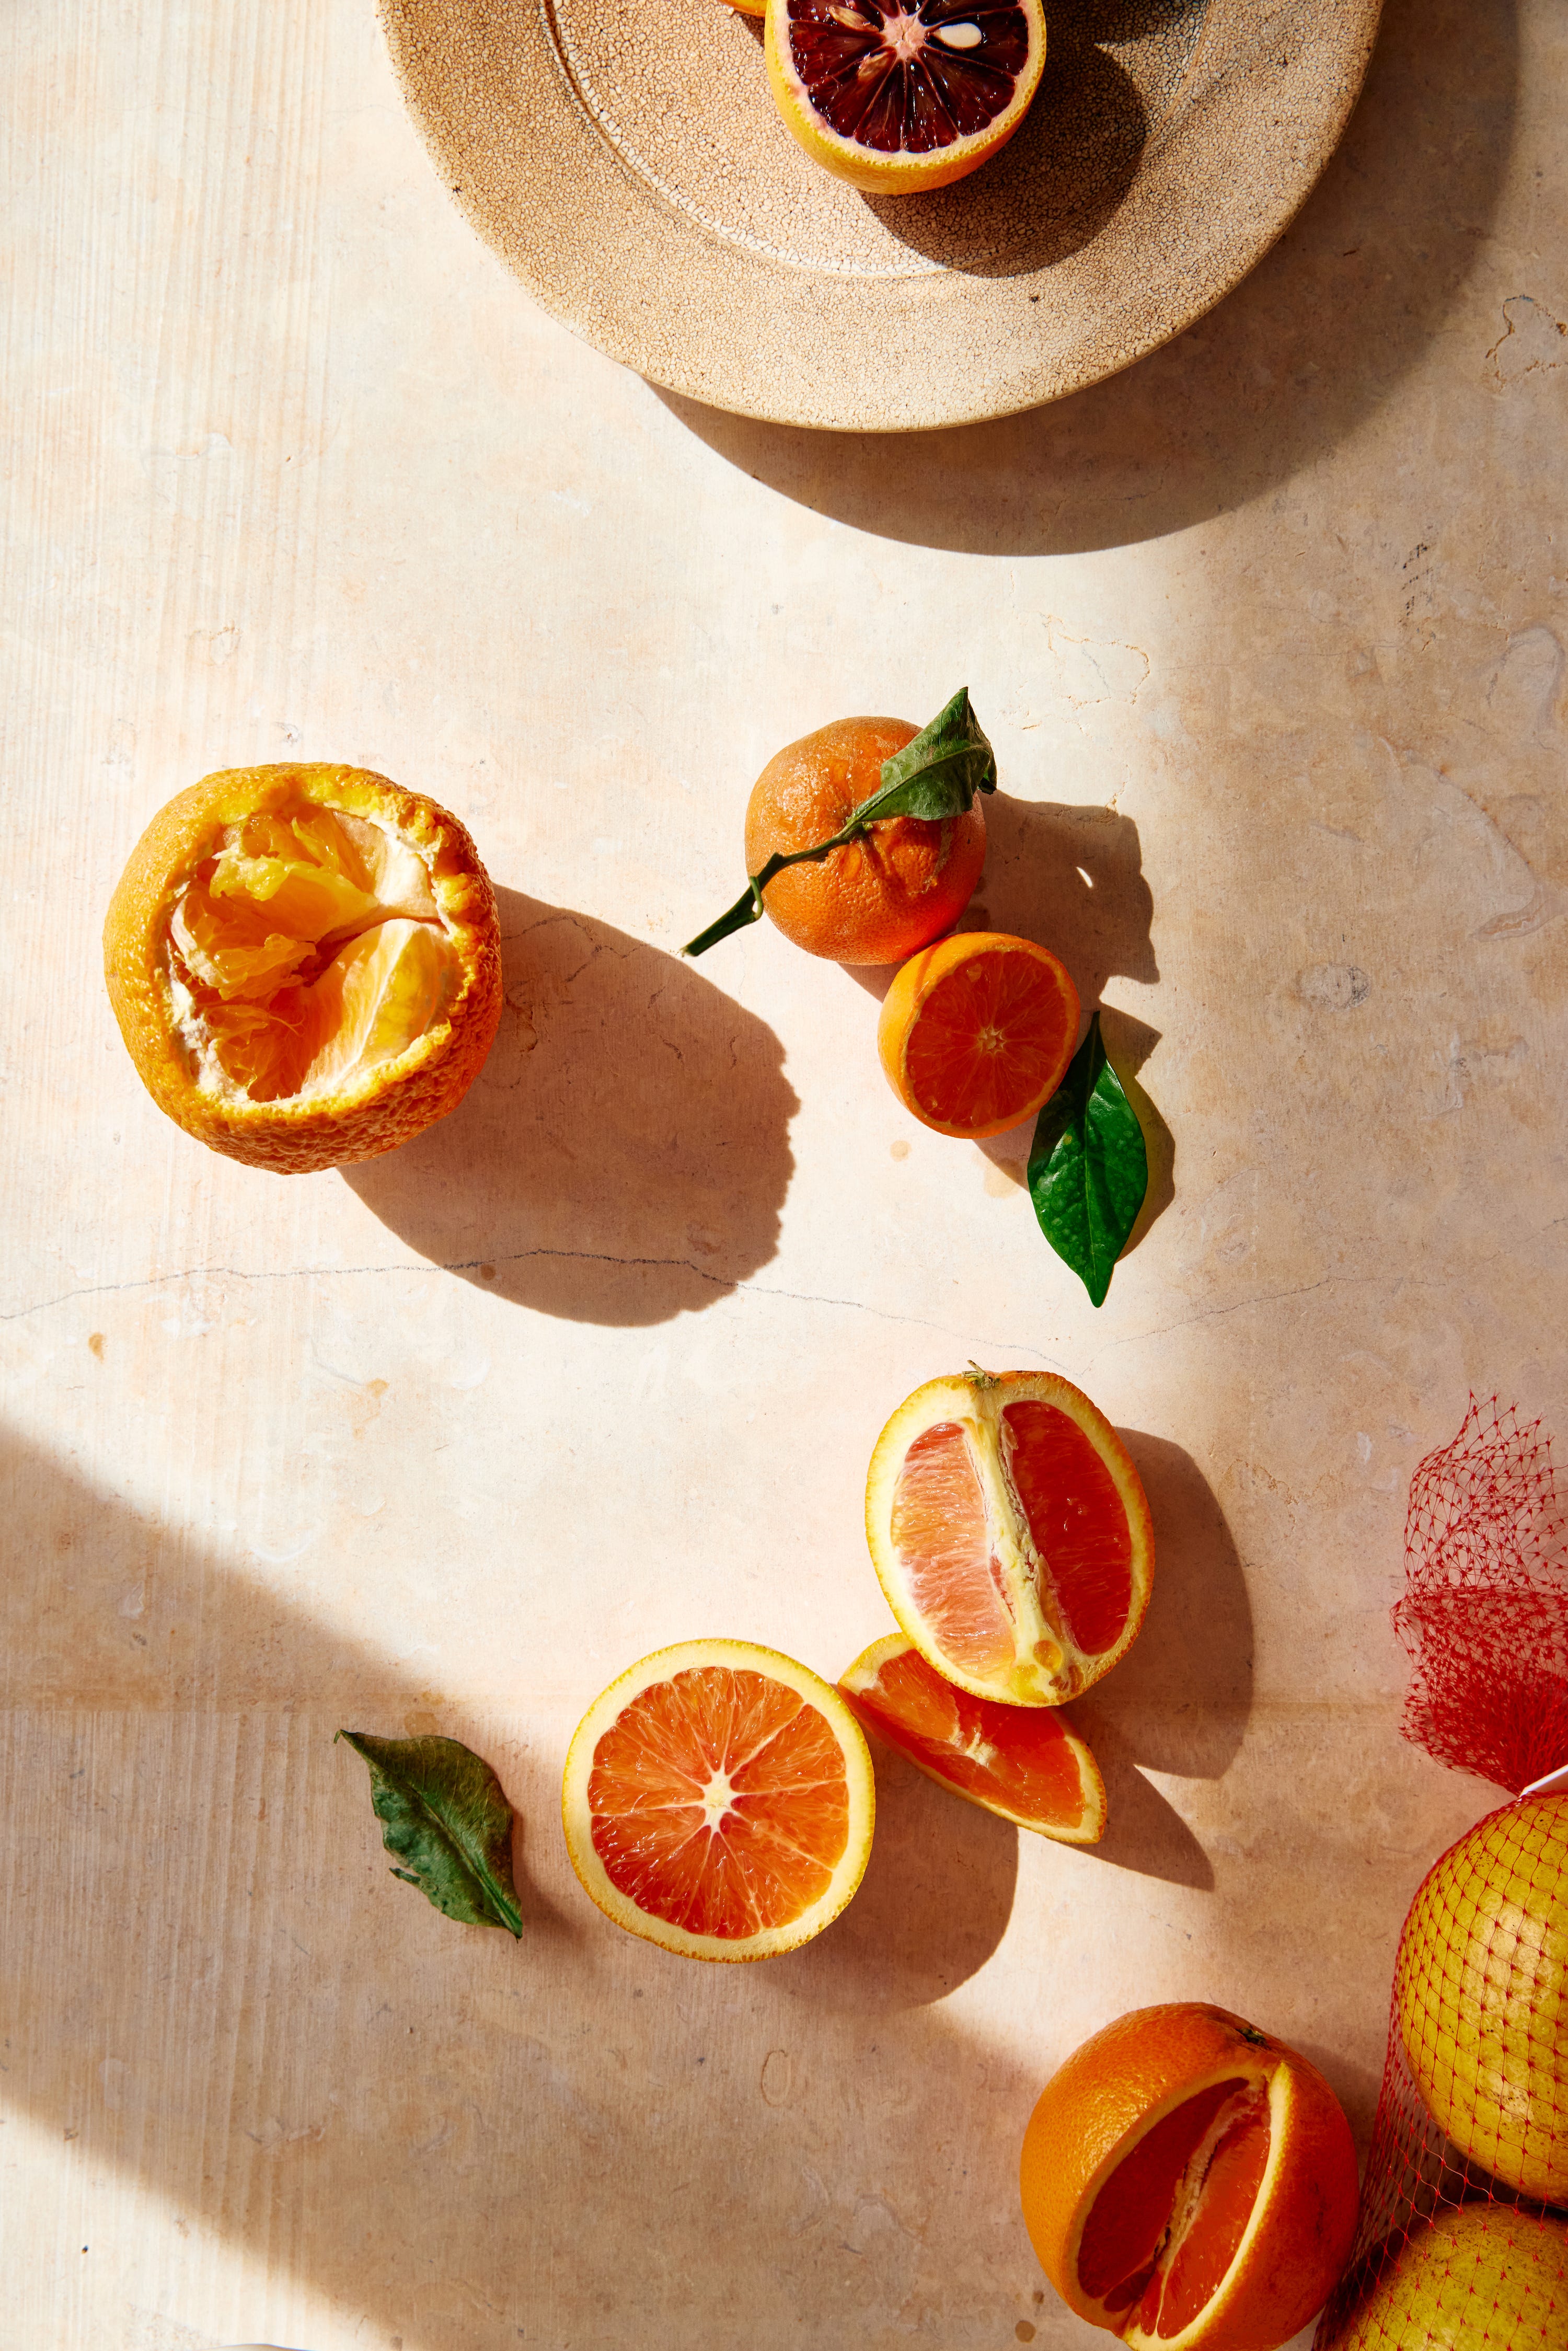 Your Guide to Everyone's Favorite Winter Citrus: Clementines